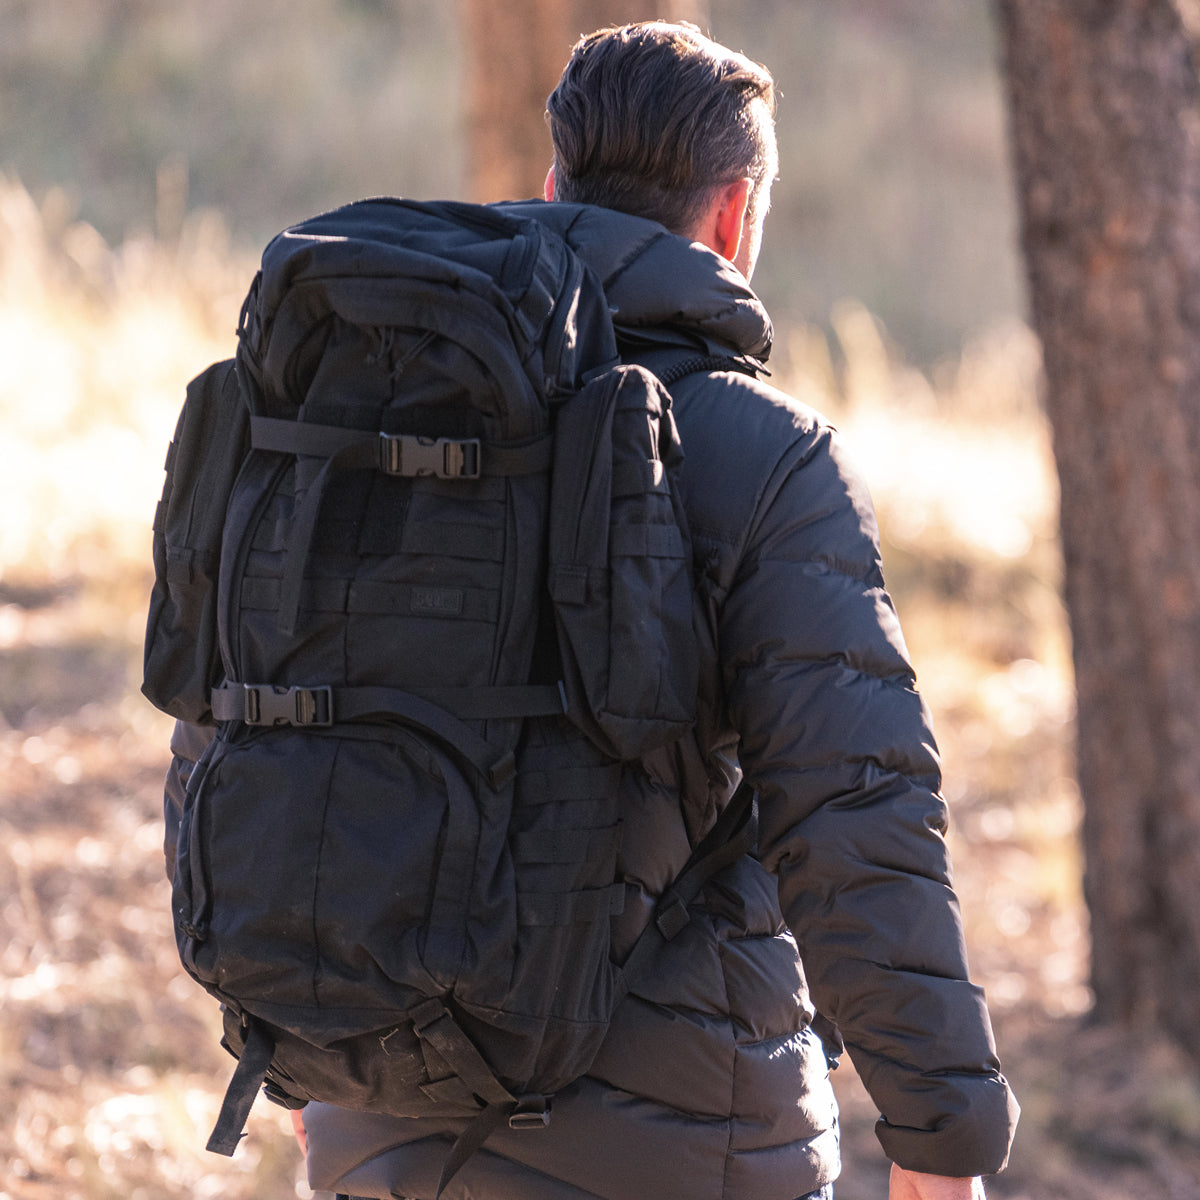 REVIEW: 5.11 Tactical RUSH 100 Backpack